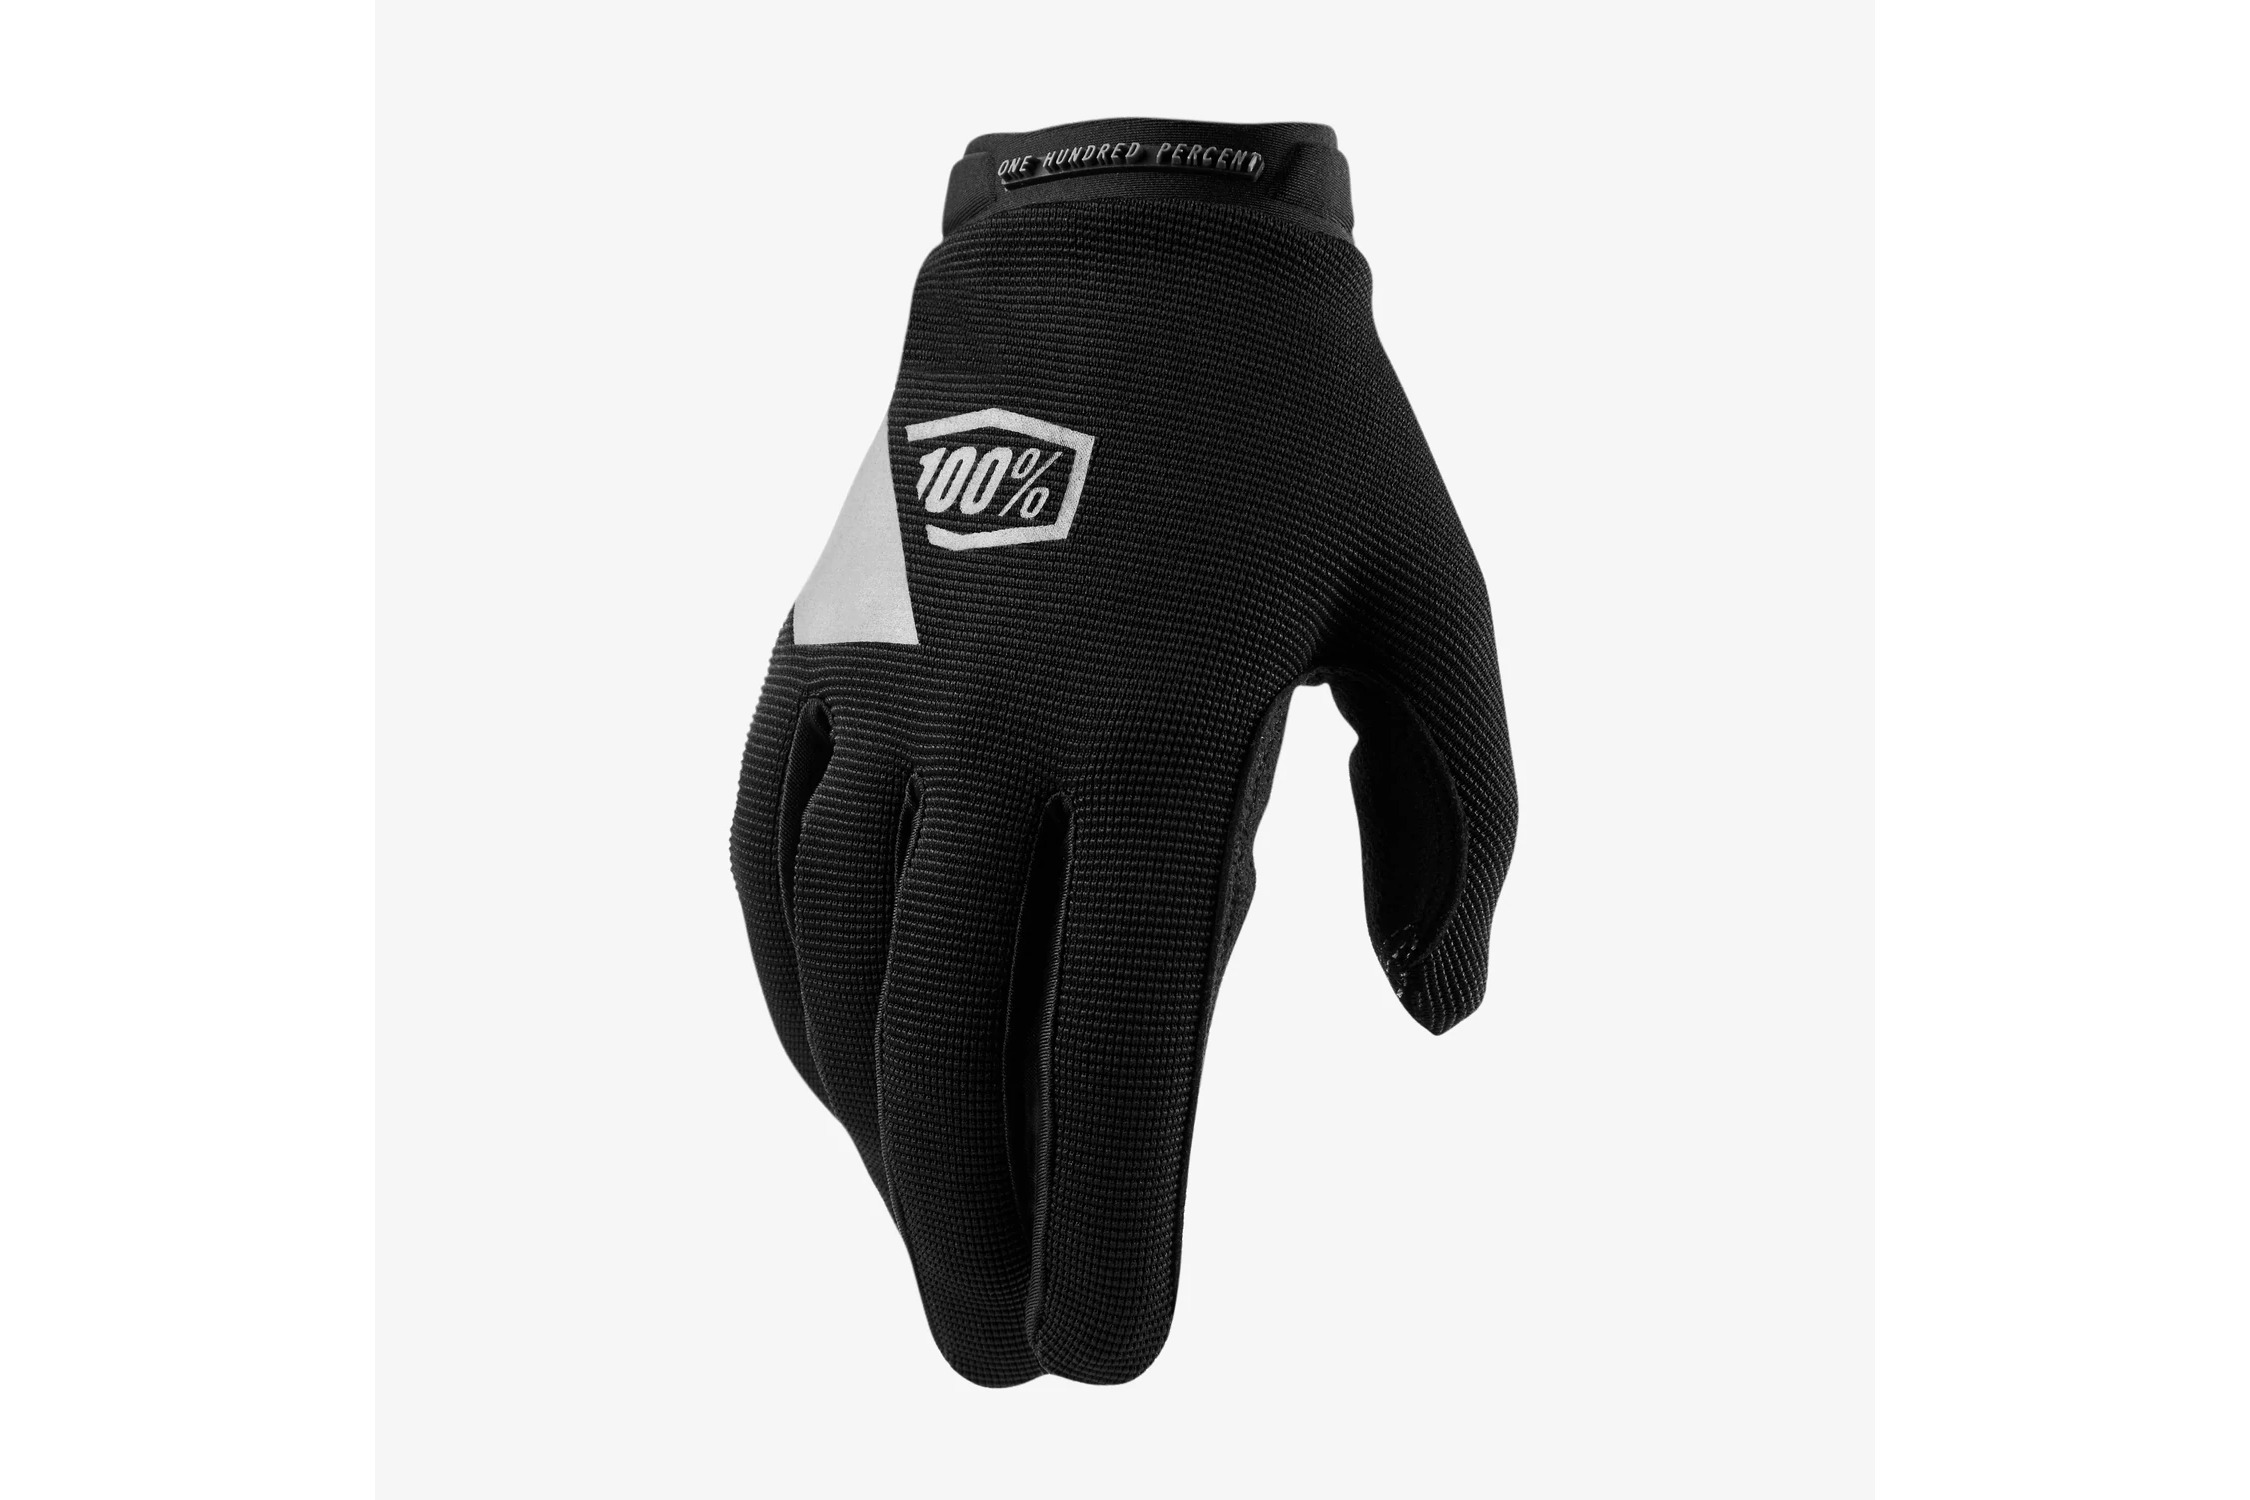 100% Womens Gloves Ridecamp 